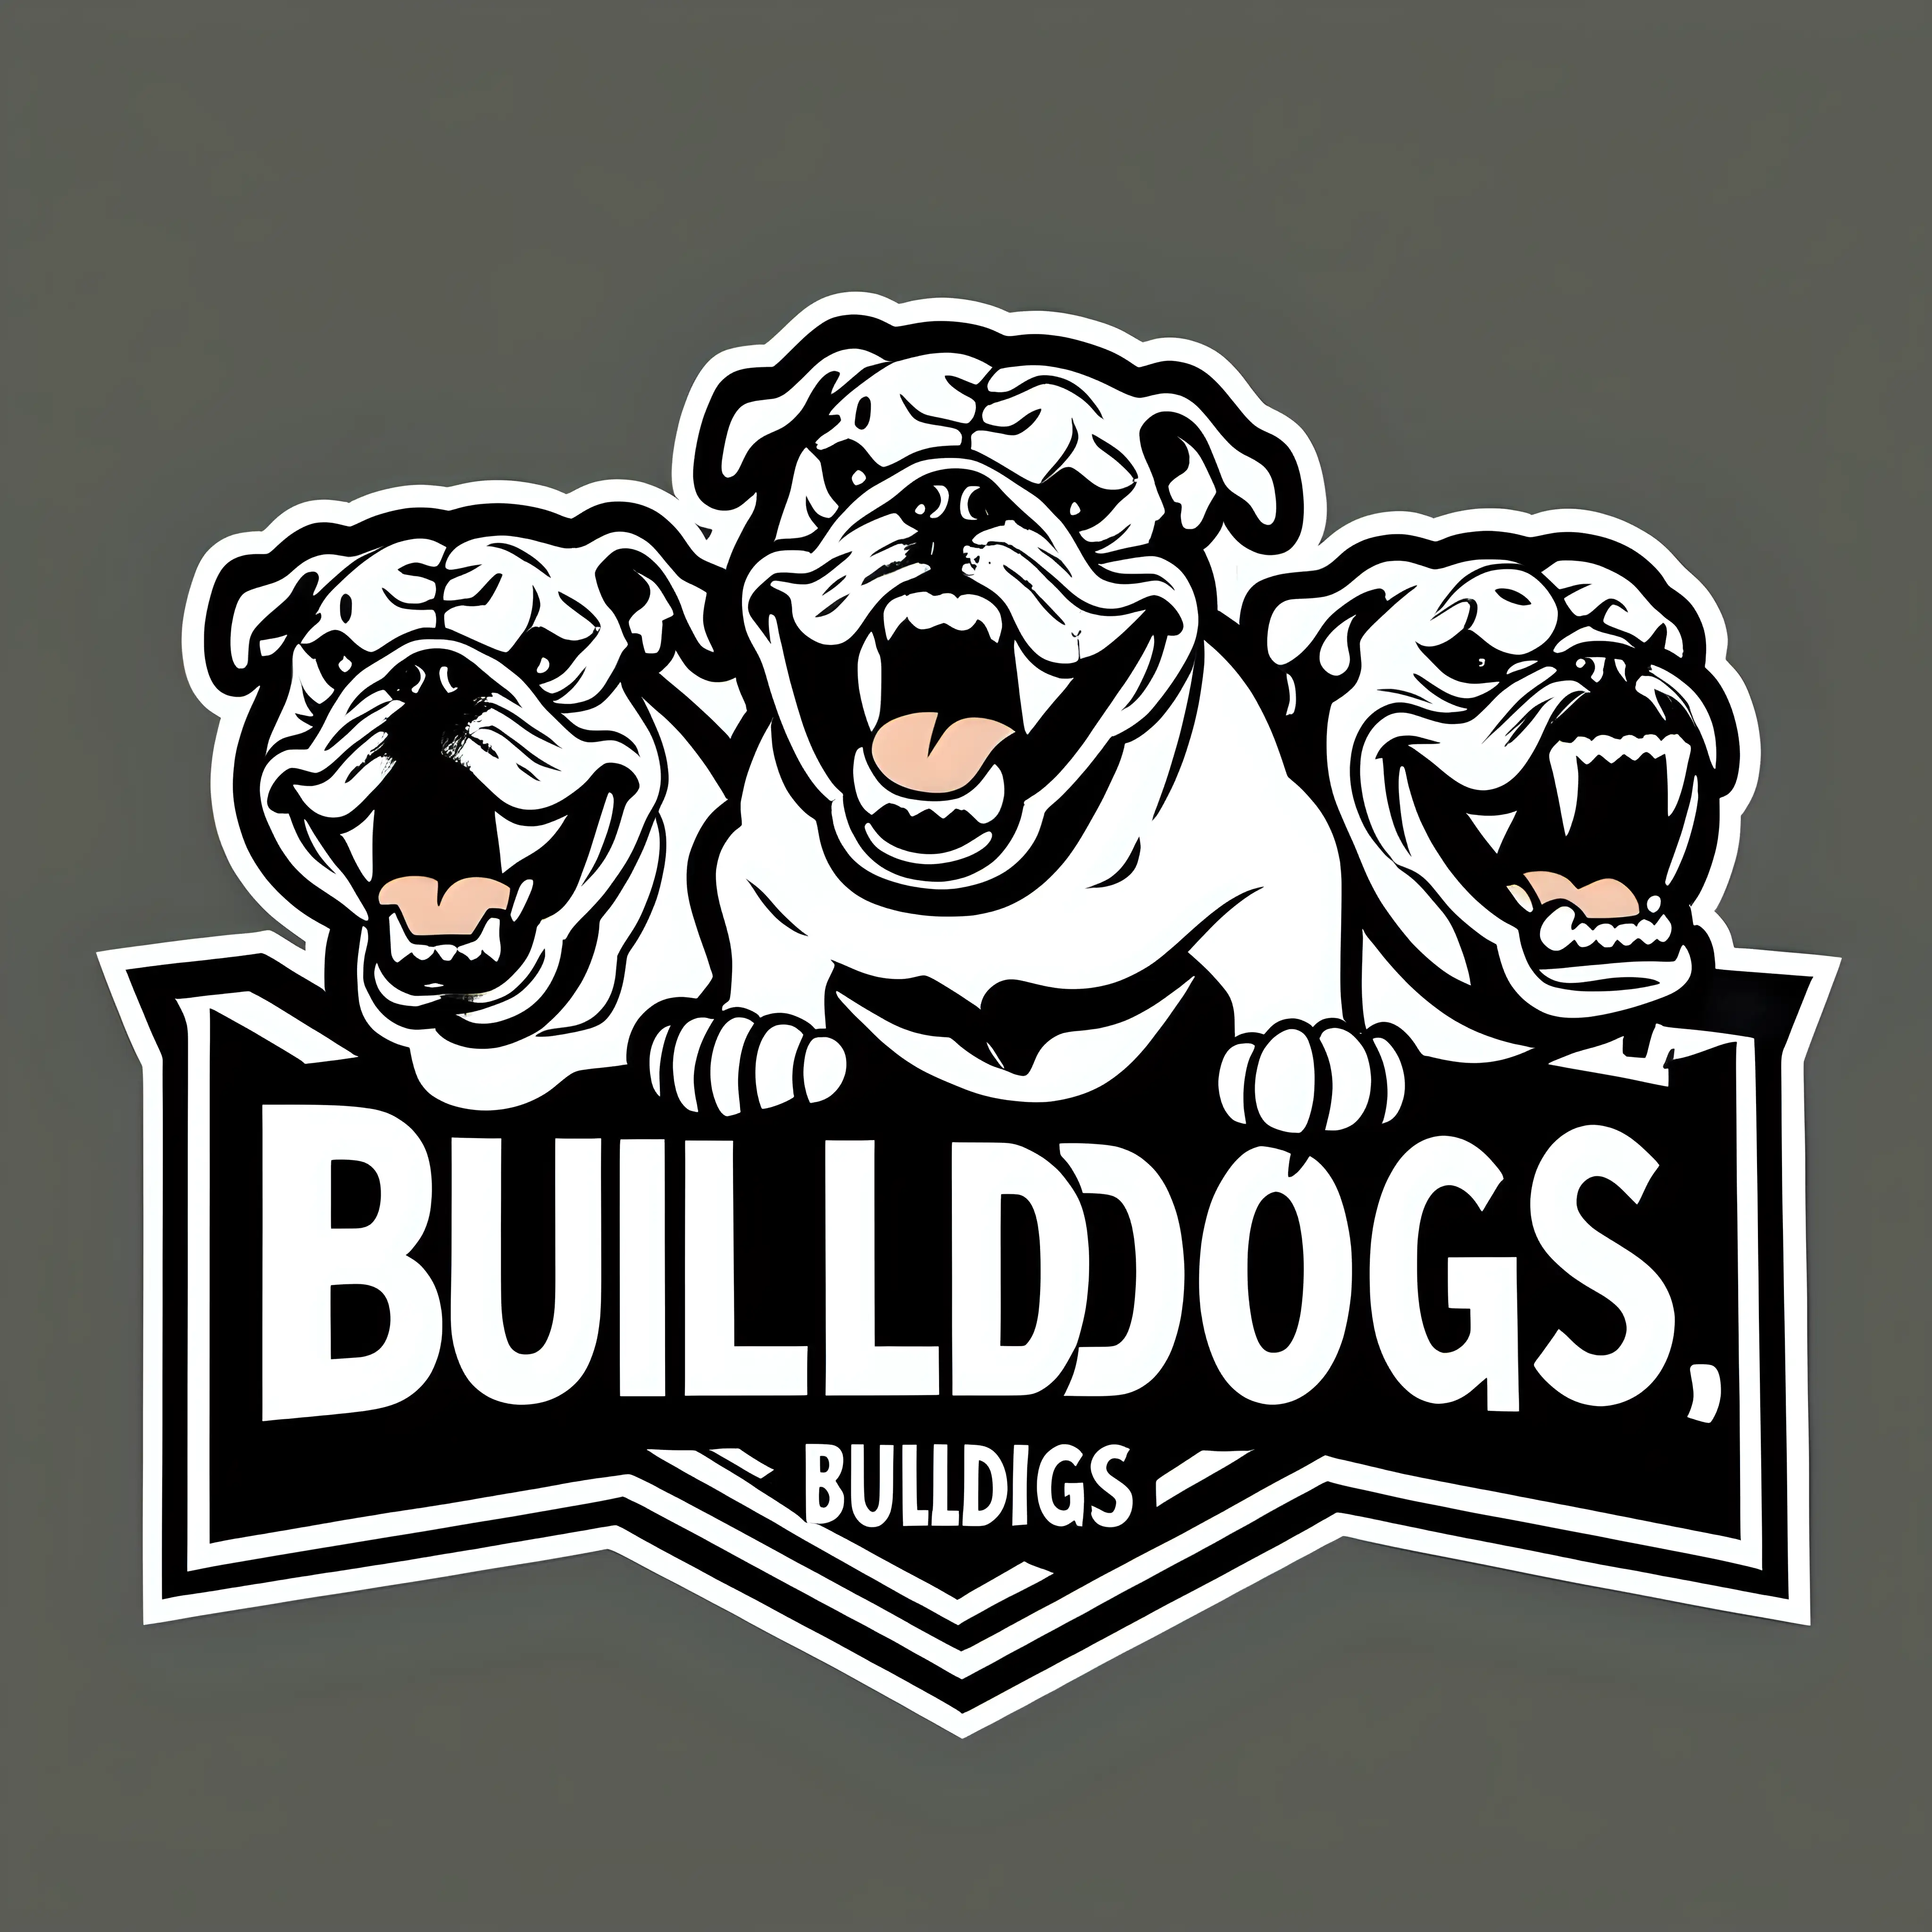 Fierce Bulldogs Growling with Distressed Font in Black